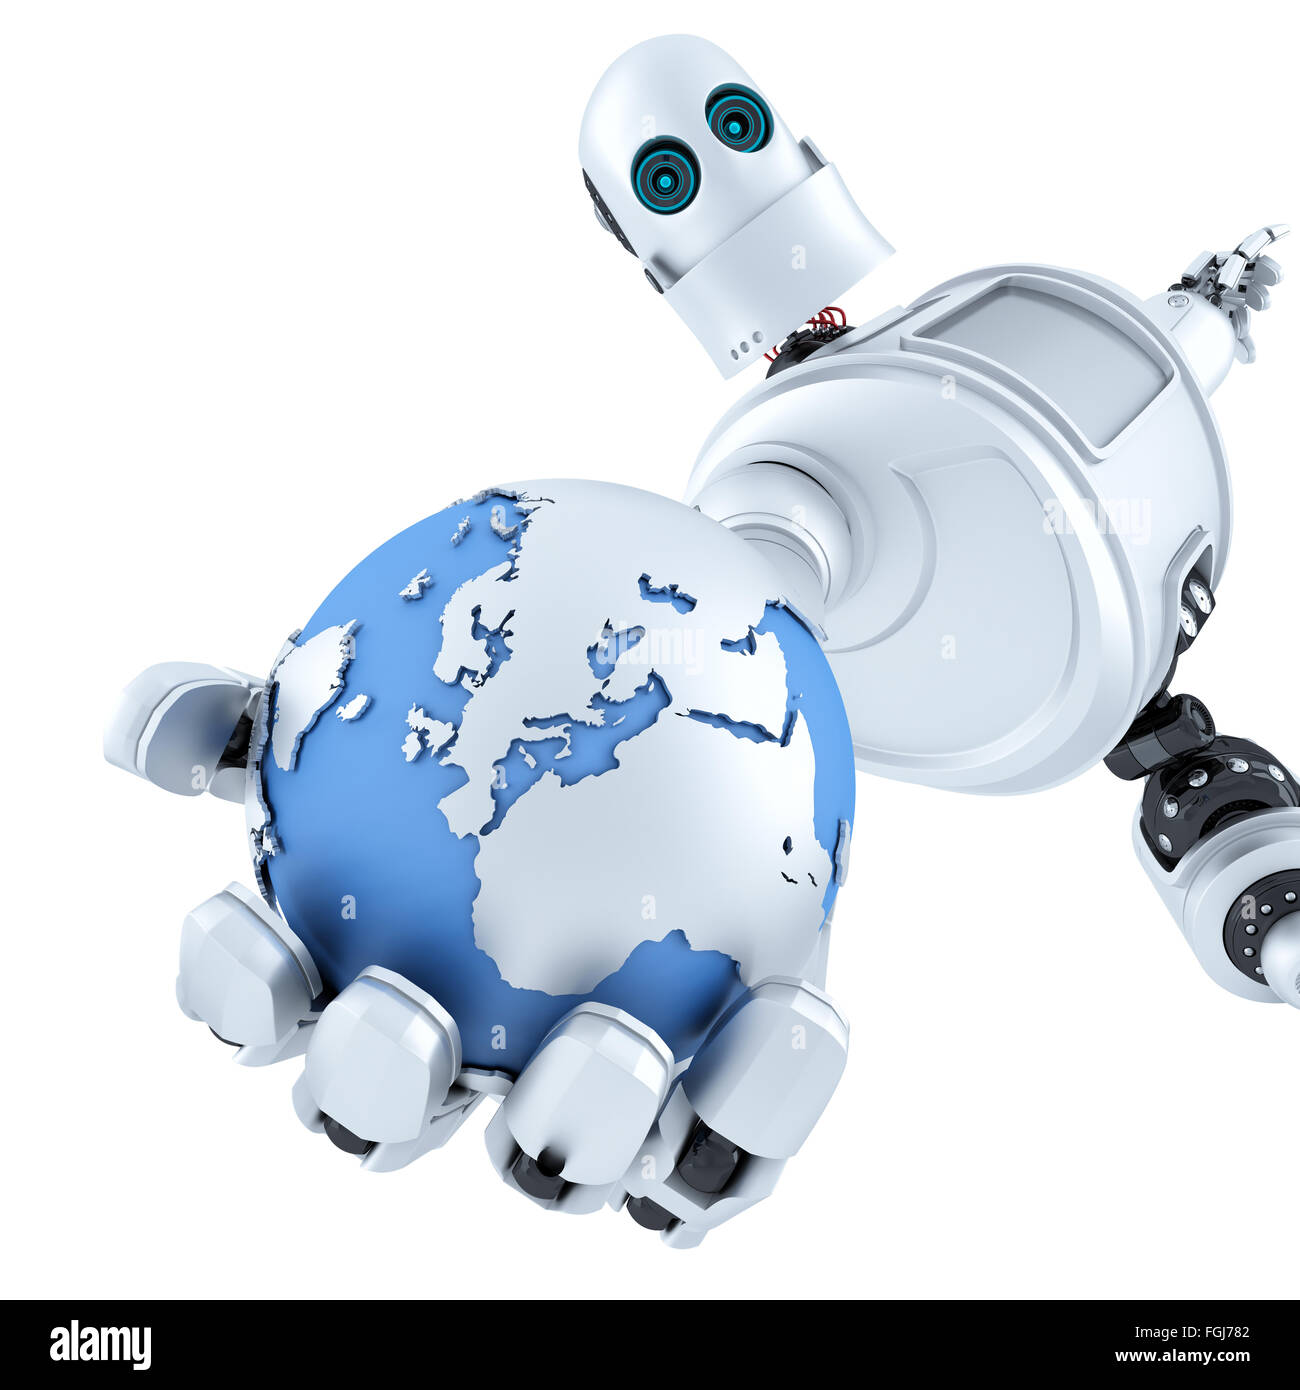 Globe in the hand of the robot. Technology concept. Isolated over white. Contains clipping path Stock Photo